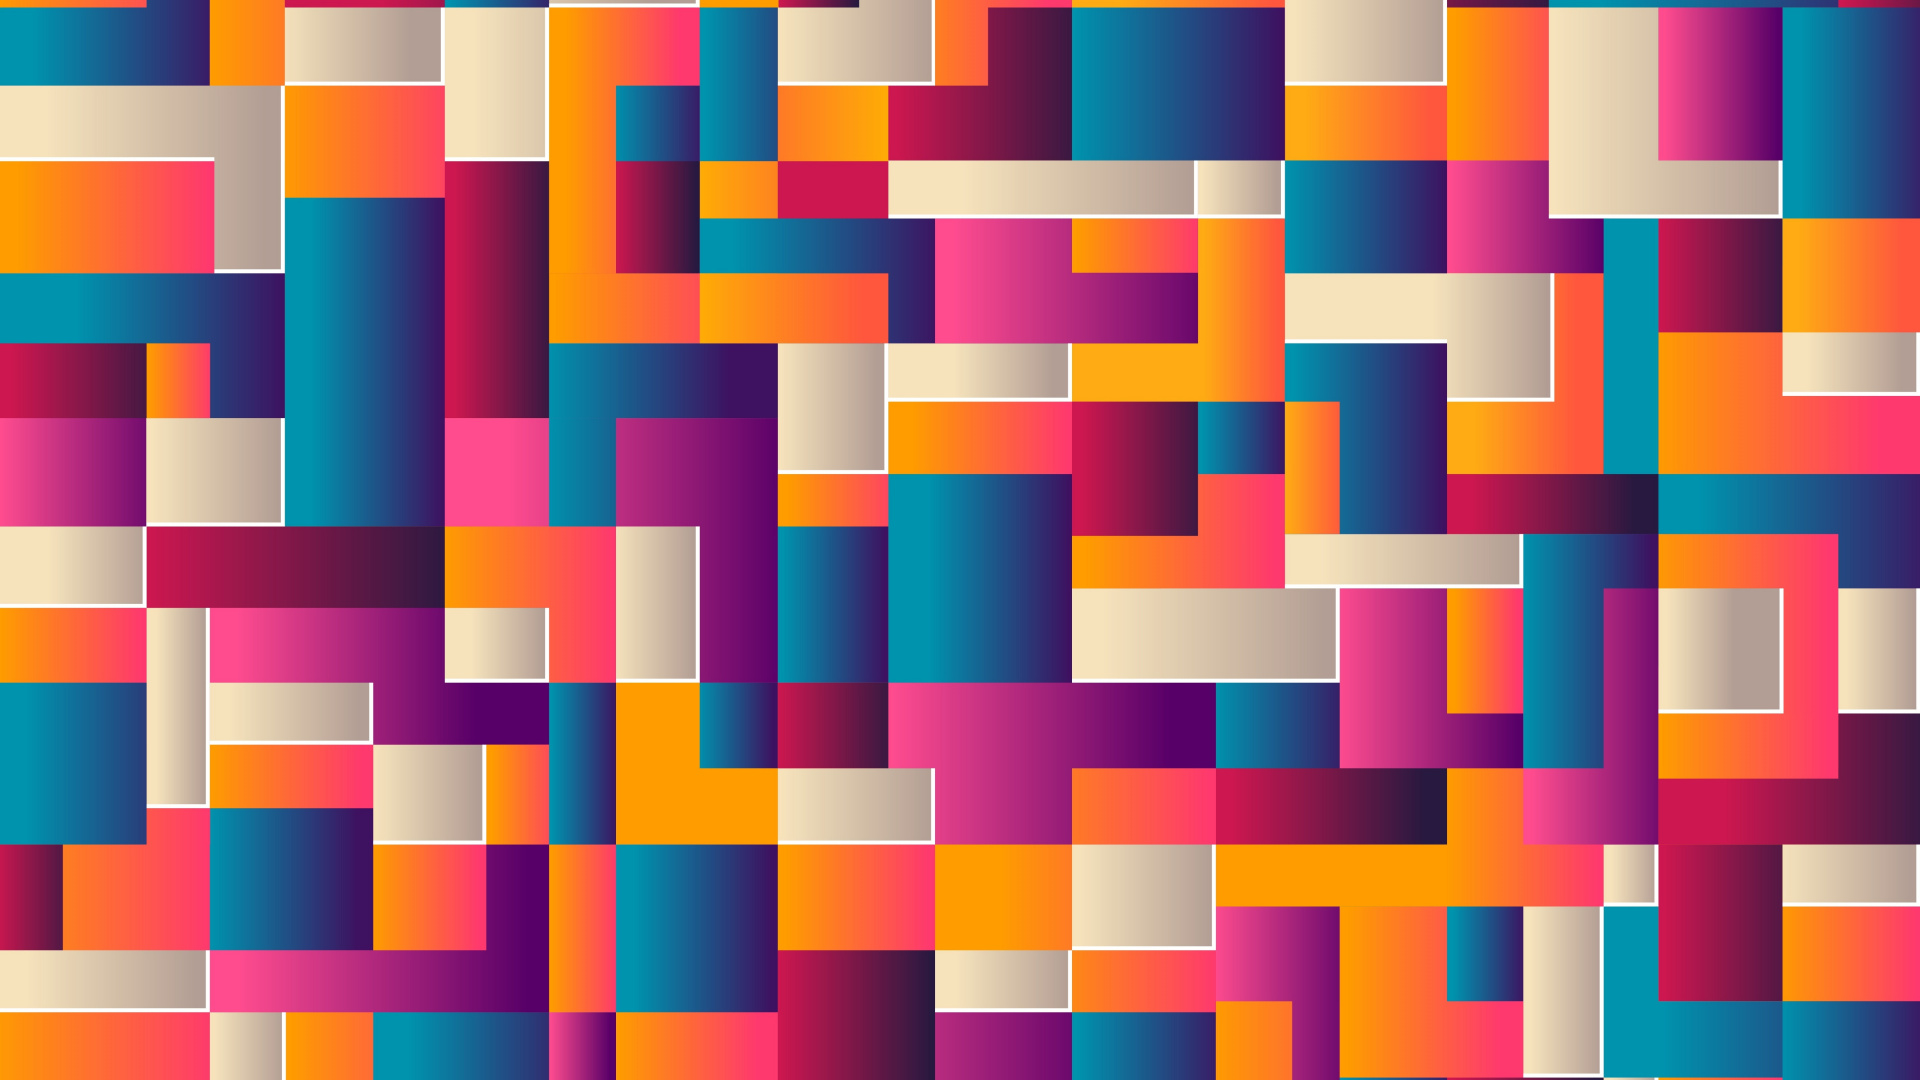 Colorful, Pattern, Abstract, Wallpaper - Full Hd Abstract Hd 1080p Wallpaper Colorful - HD Wallpaper 